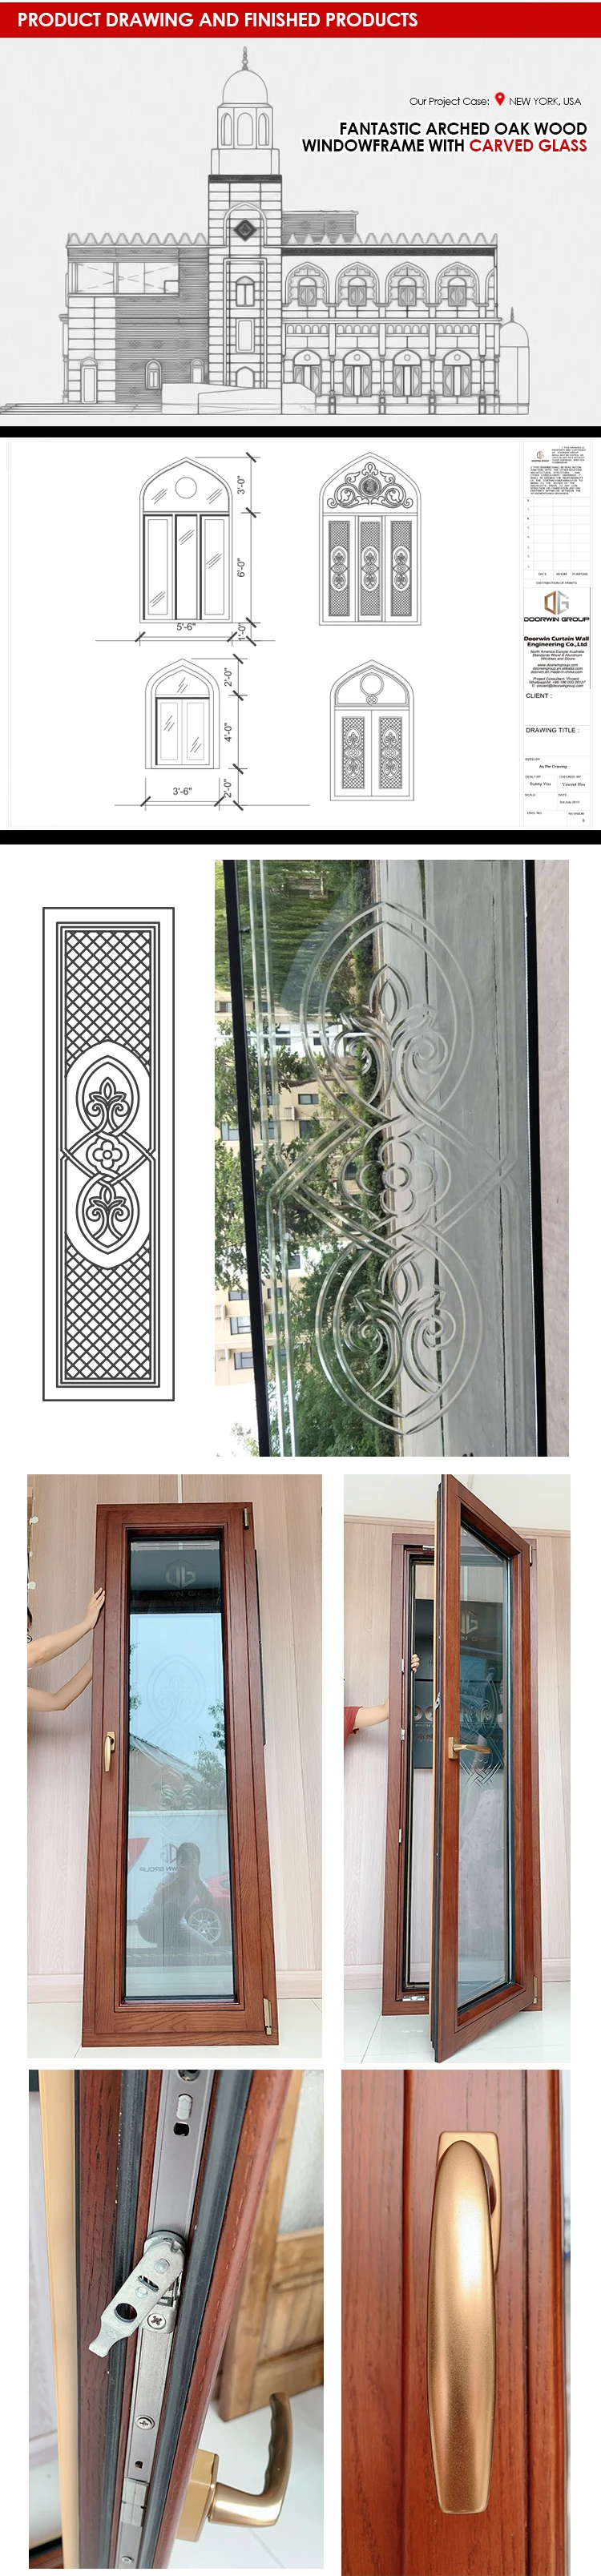 Top quality stained glass window designs home